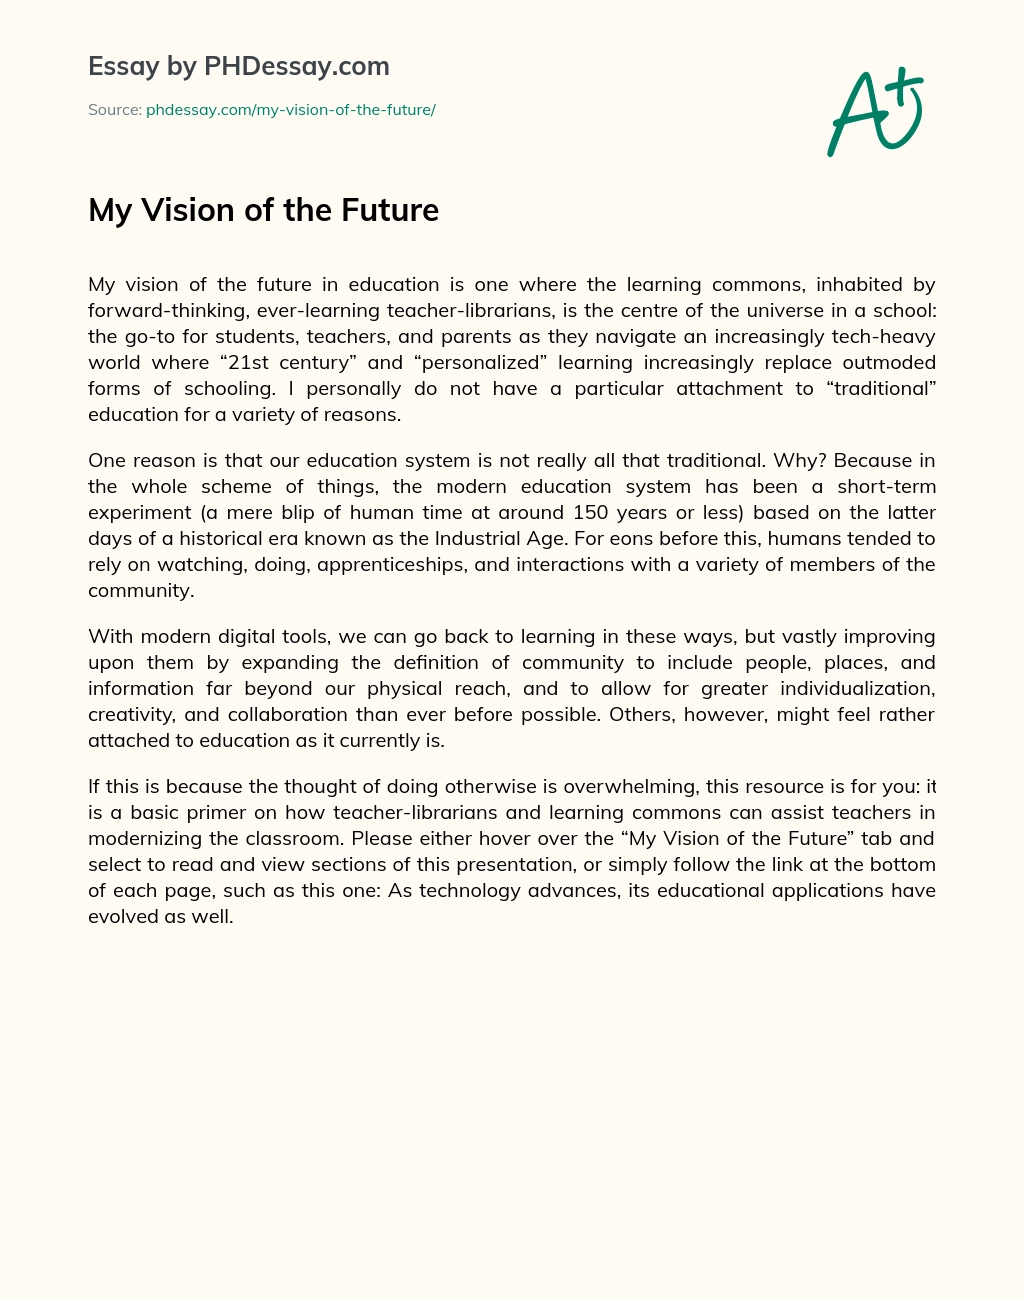 My Vision of the Future essay